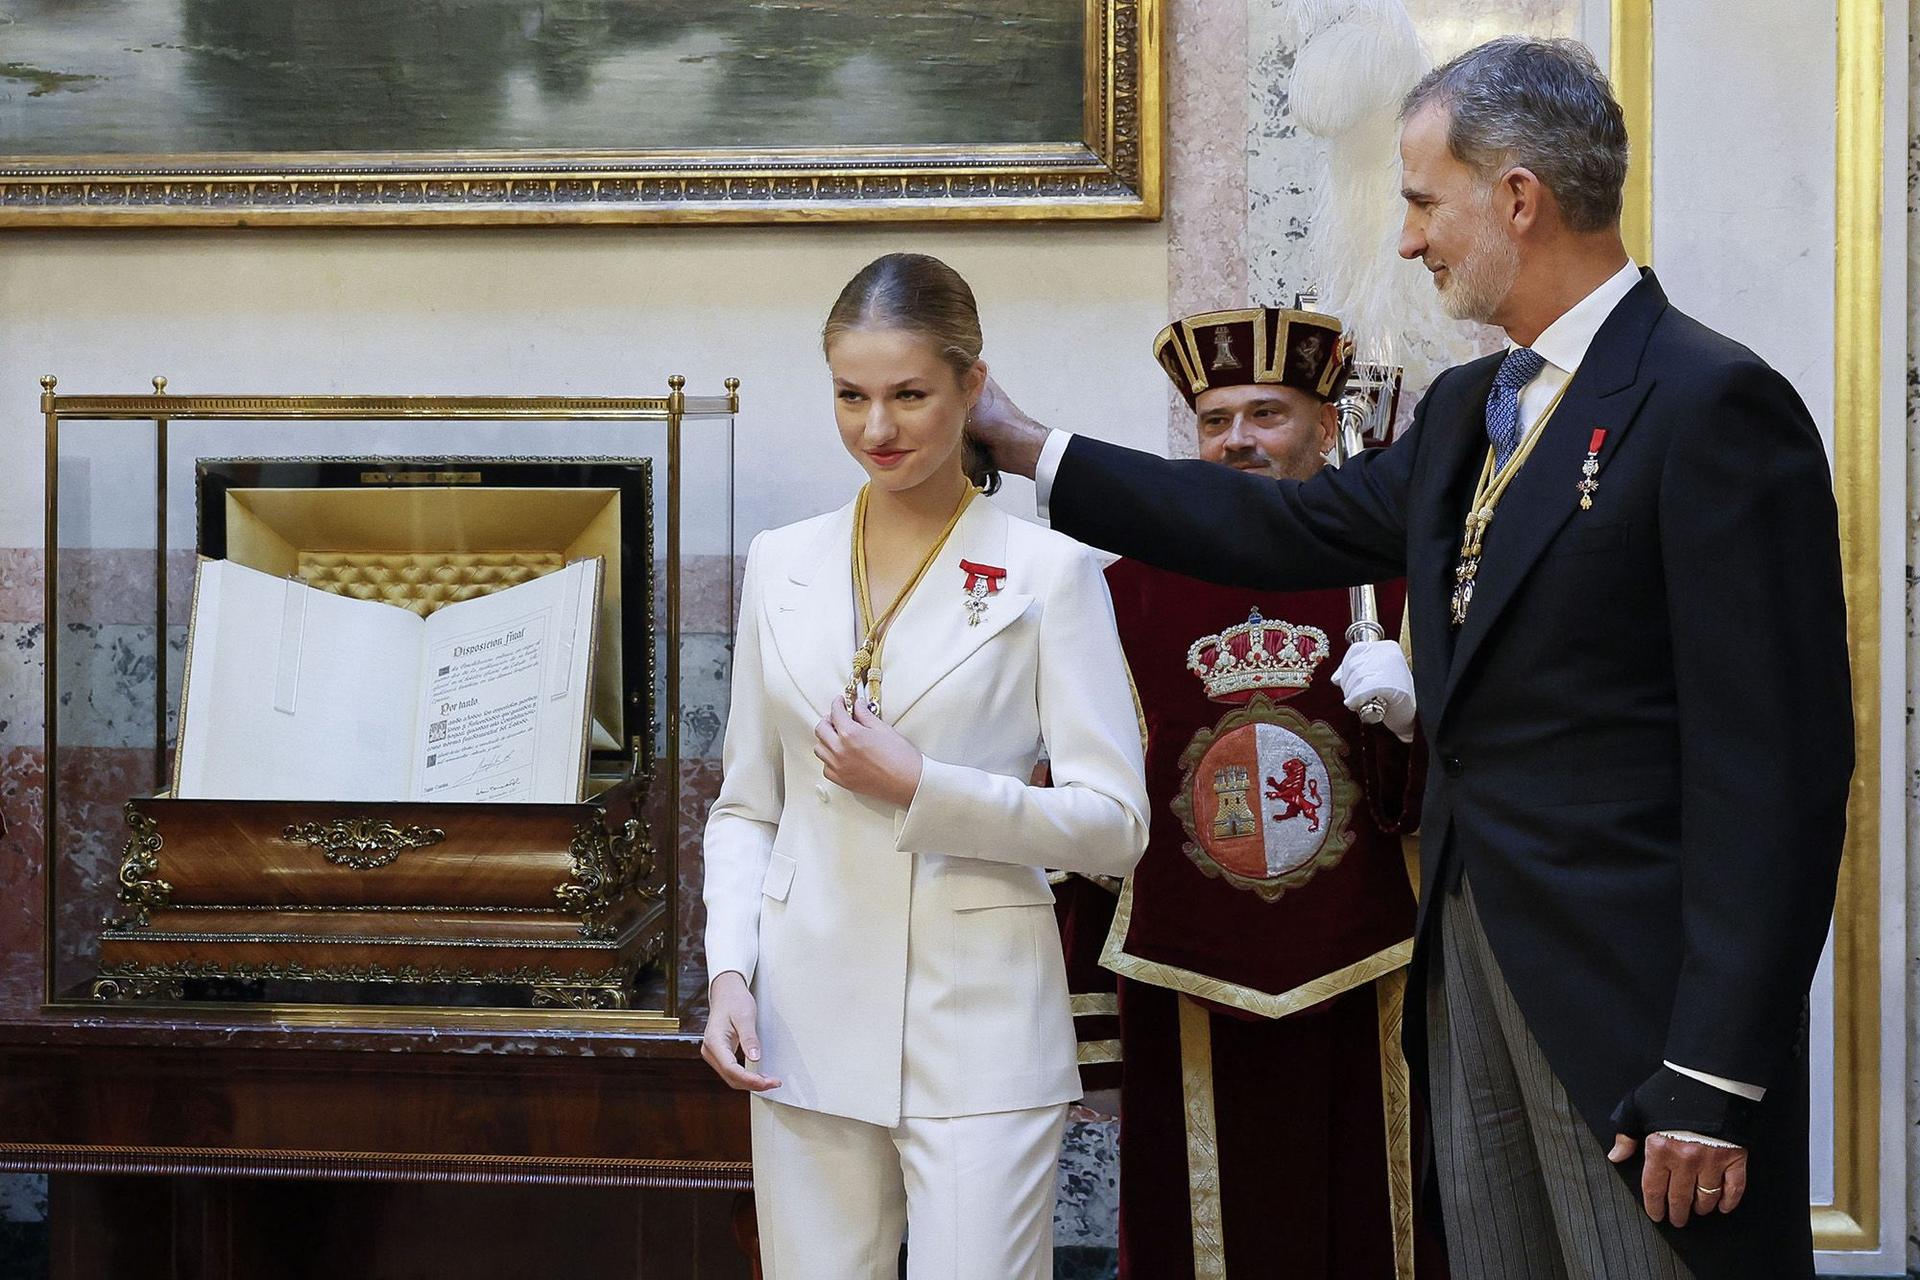 Spanish Crown Princess of Asturias Leonor (R) attends with Spain's King Felipe VI a ceremony to swear loyalty to the constitution, on her 18th birthday, at the Congress of Deputies in Madrid on Tuesday.